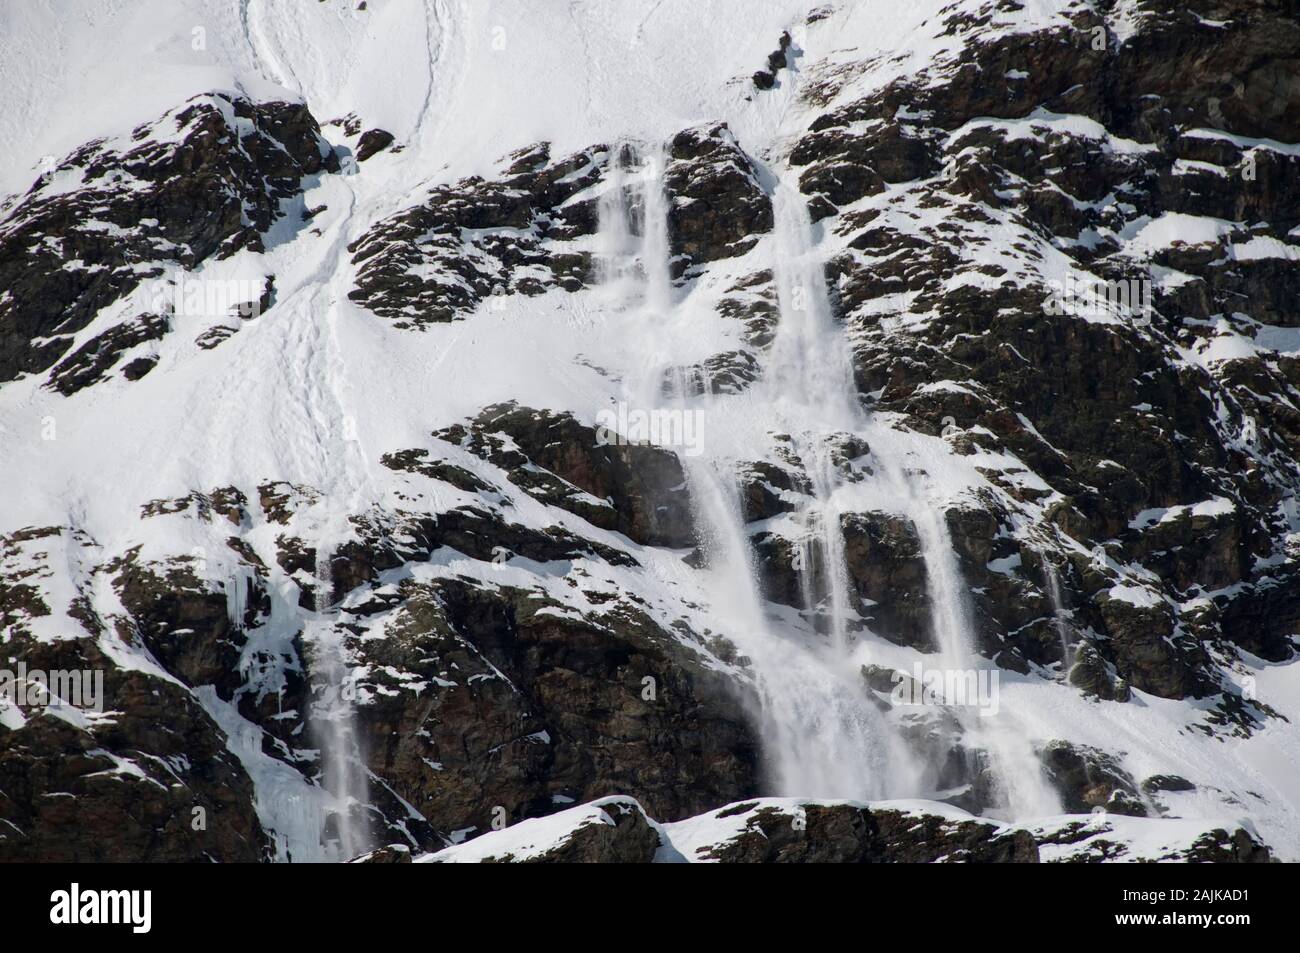 Particular of a avalanche, Italy Stock Photo